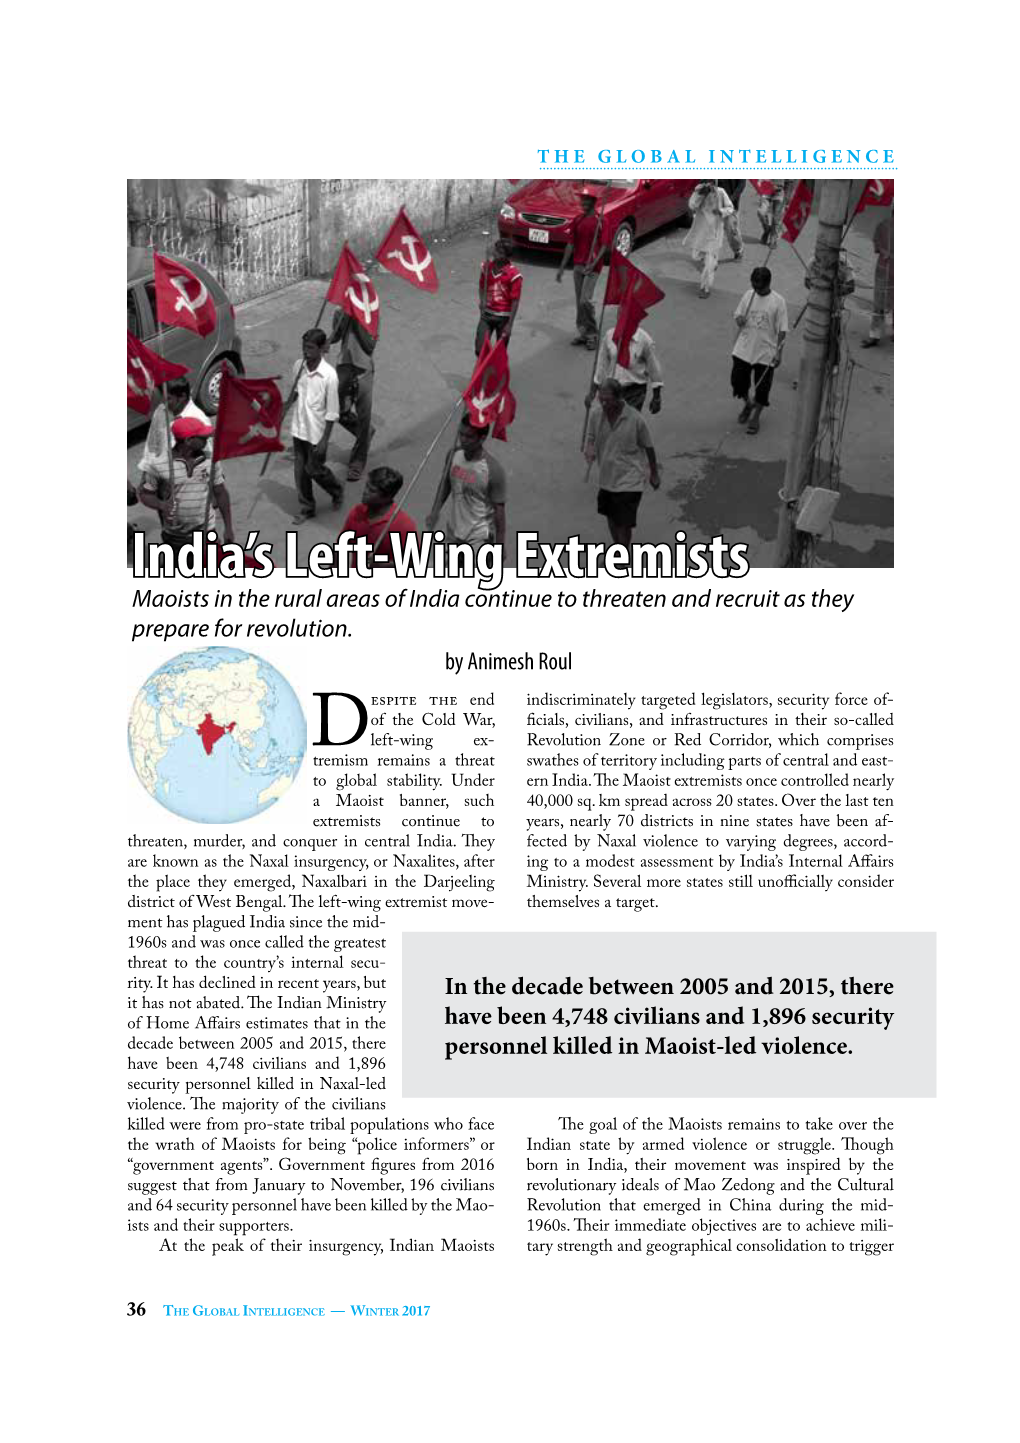 India's Left-Wing Extremists